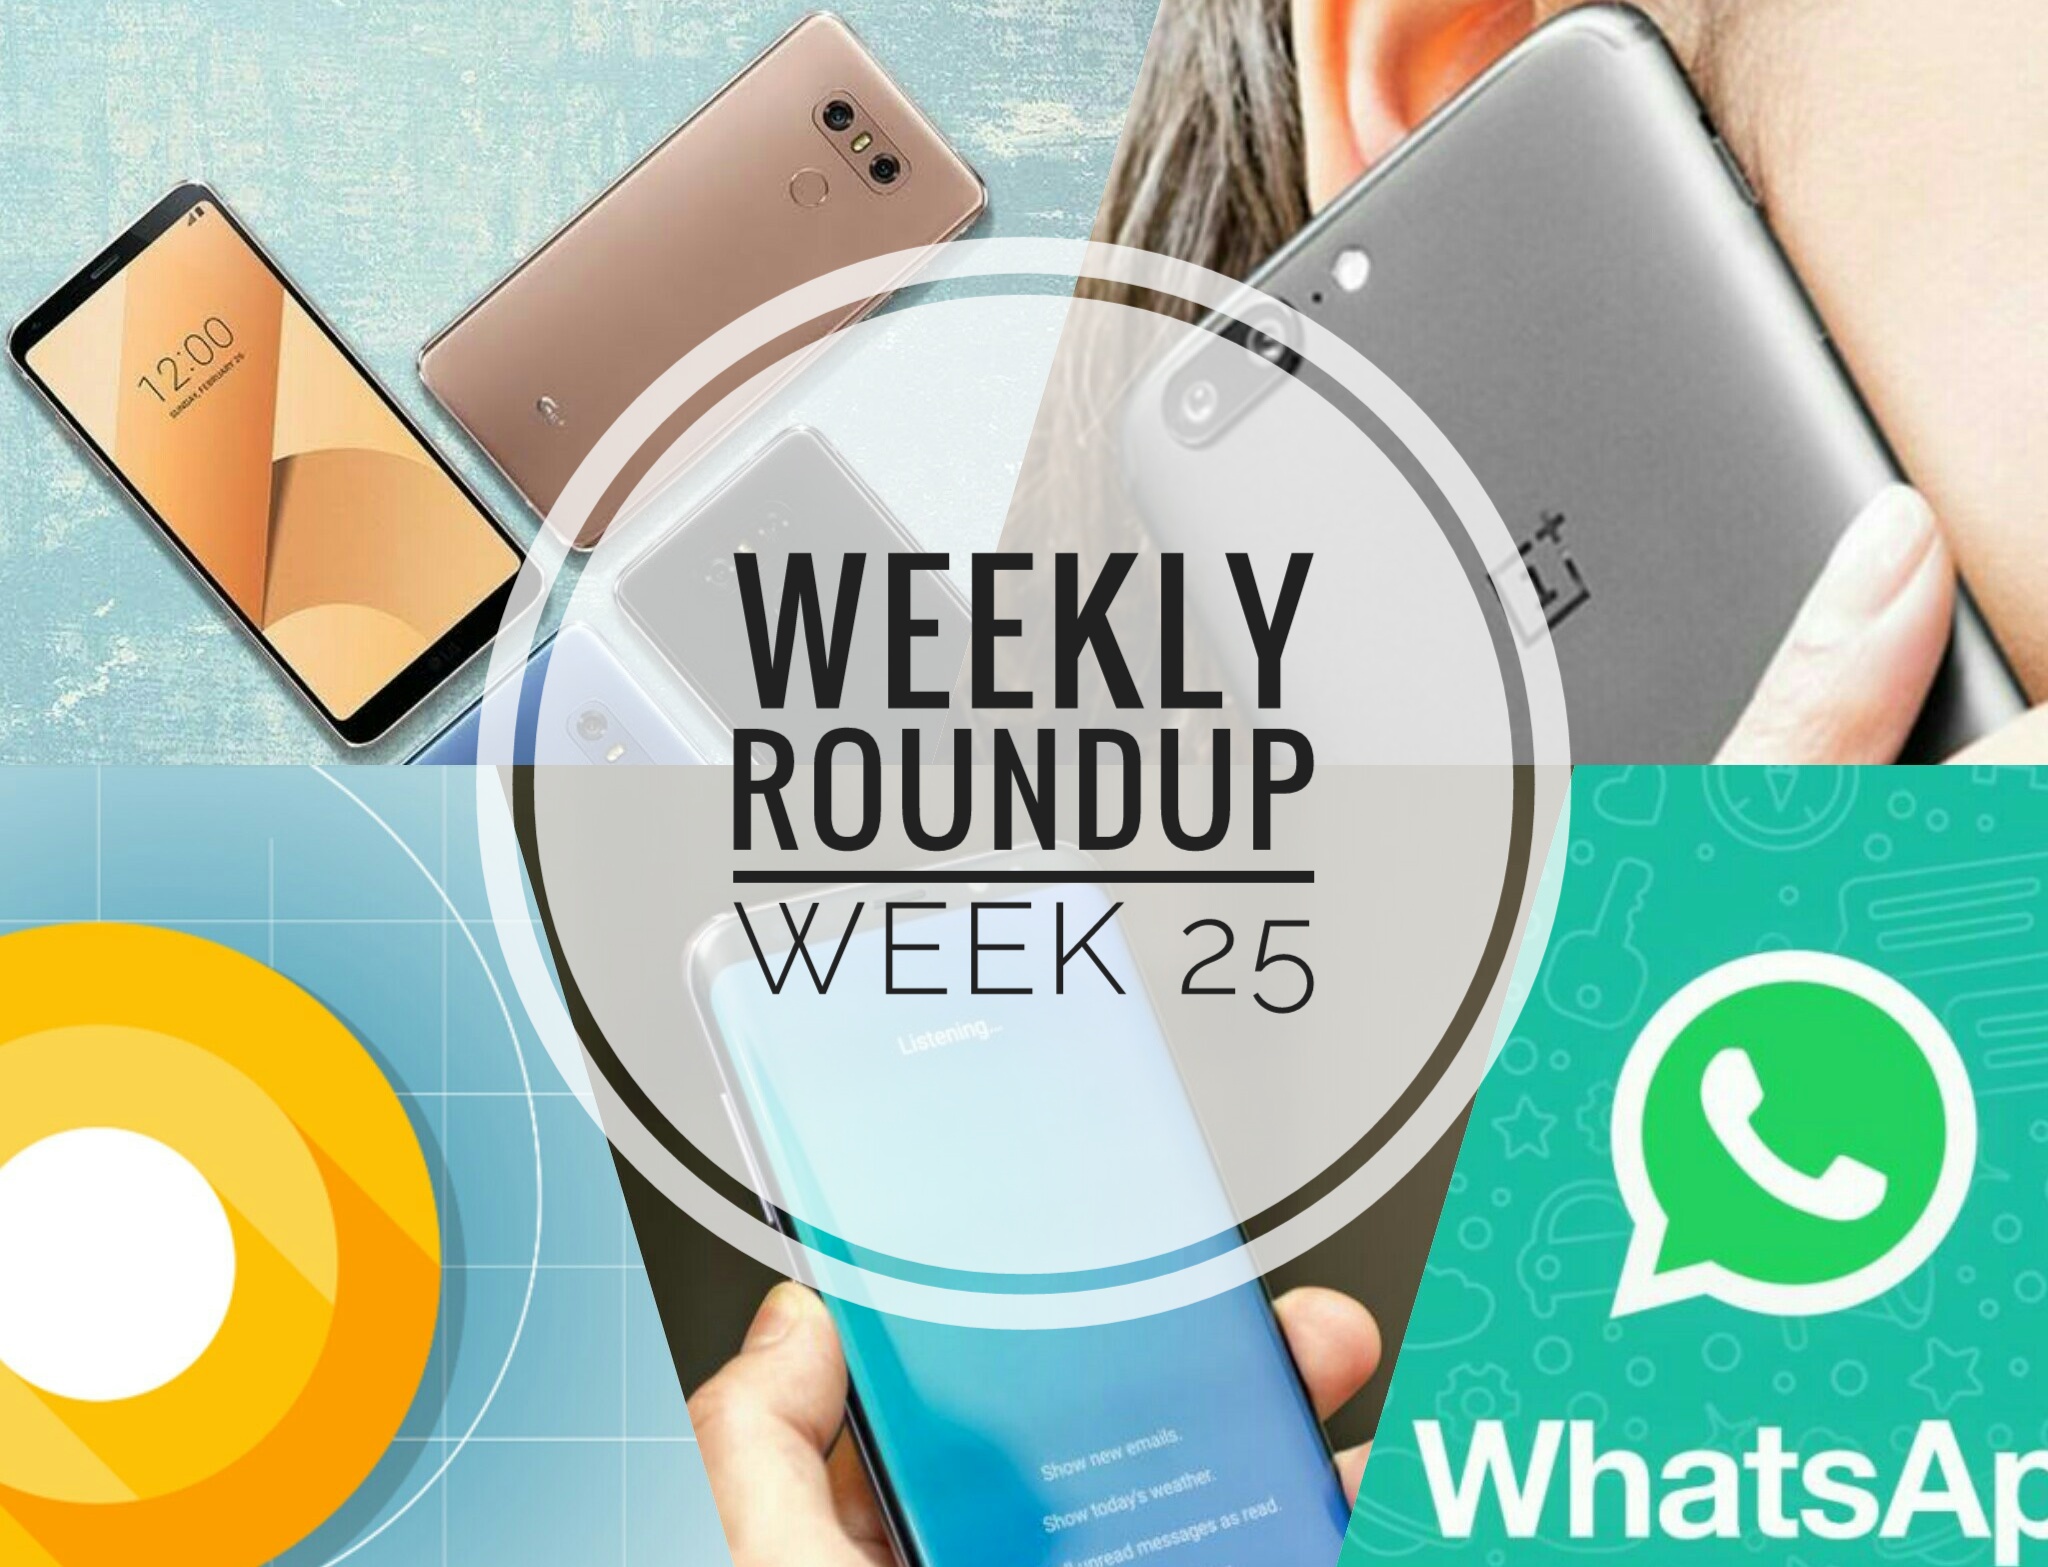 Weekly roundup: Highlights of Week 25, LG's new experiment, OnePlus 5 and more 7